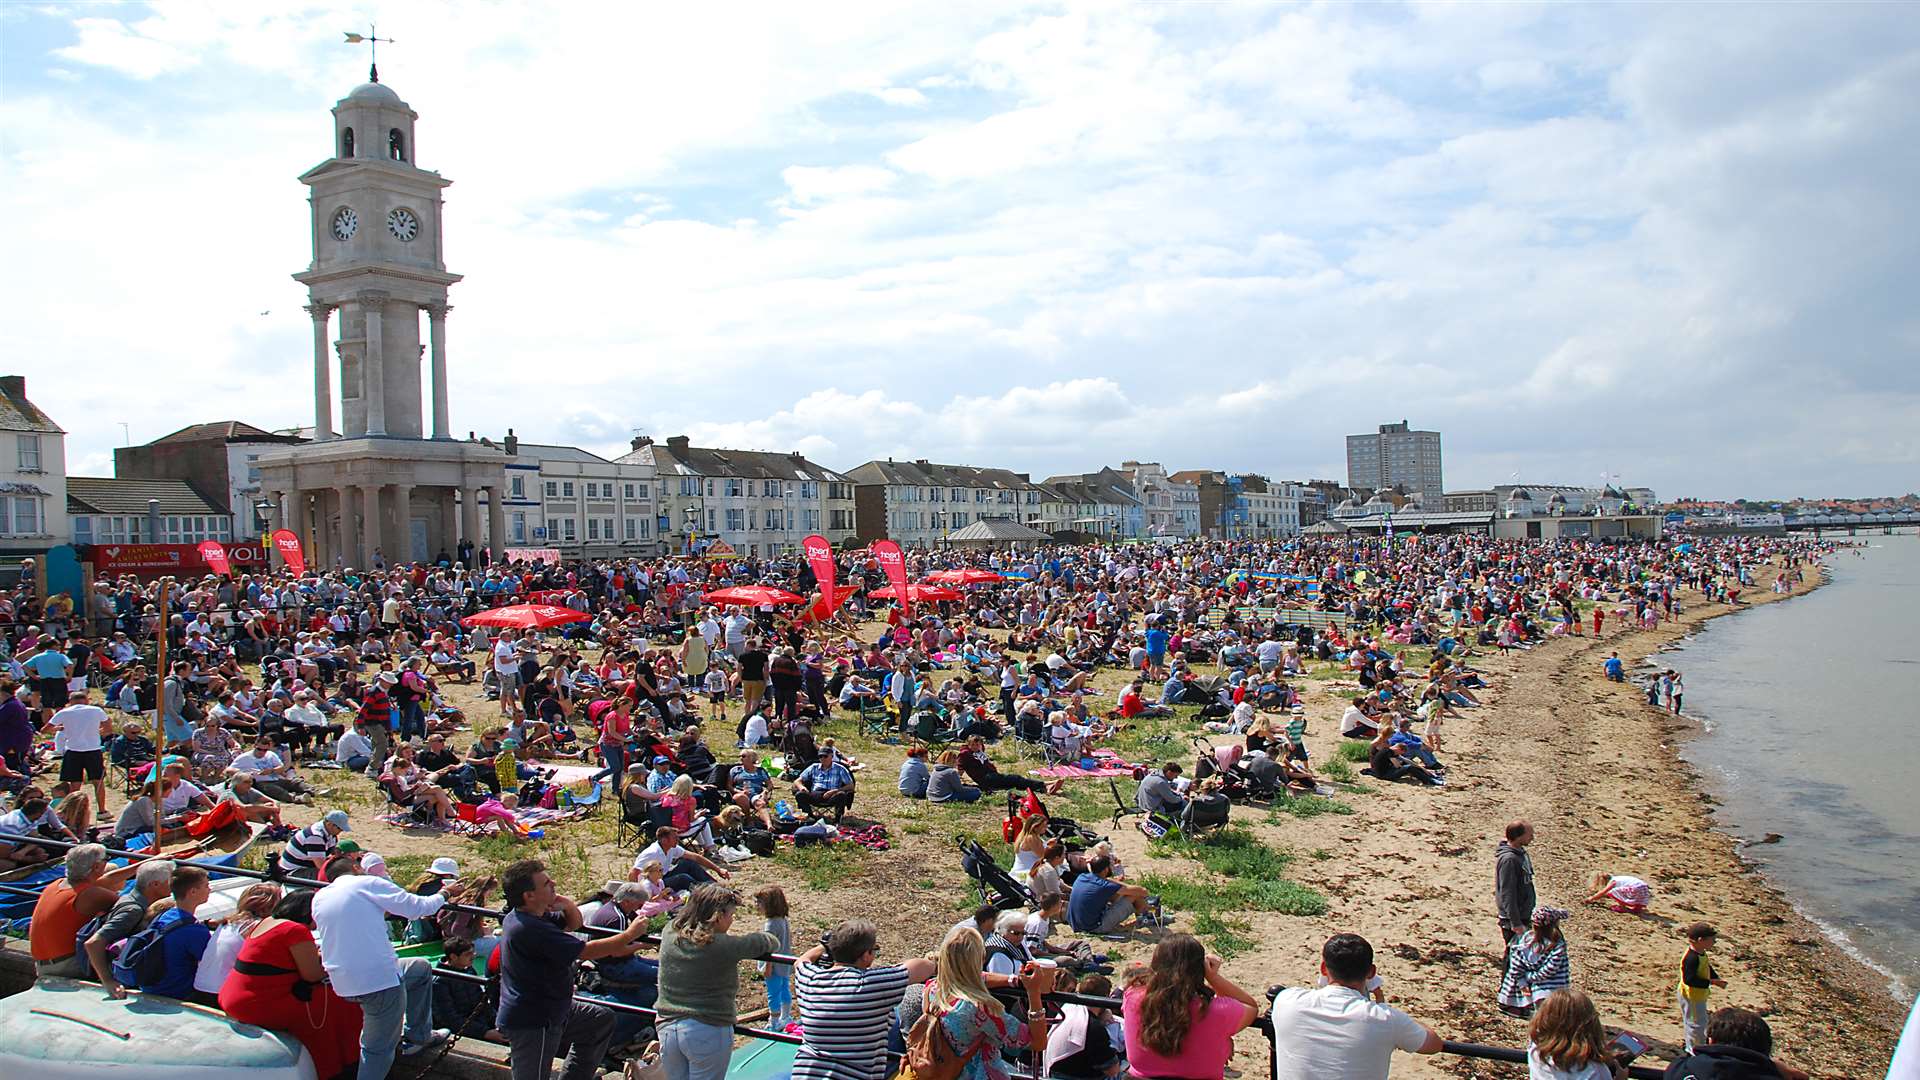 Crowds enjoy the air show in Herne Bay